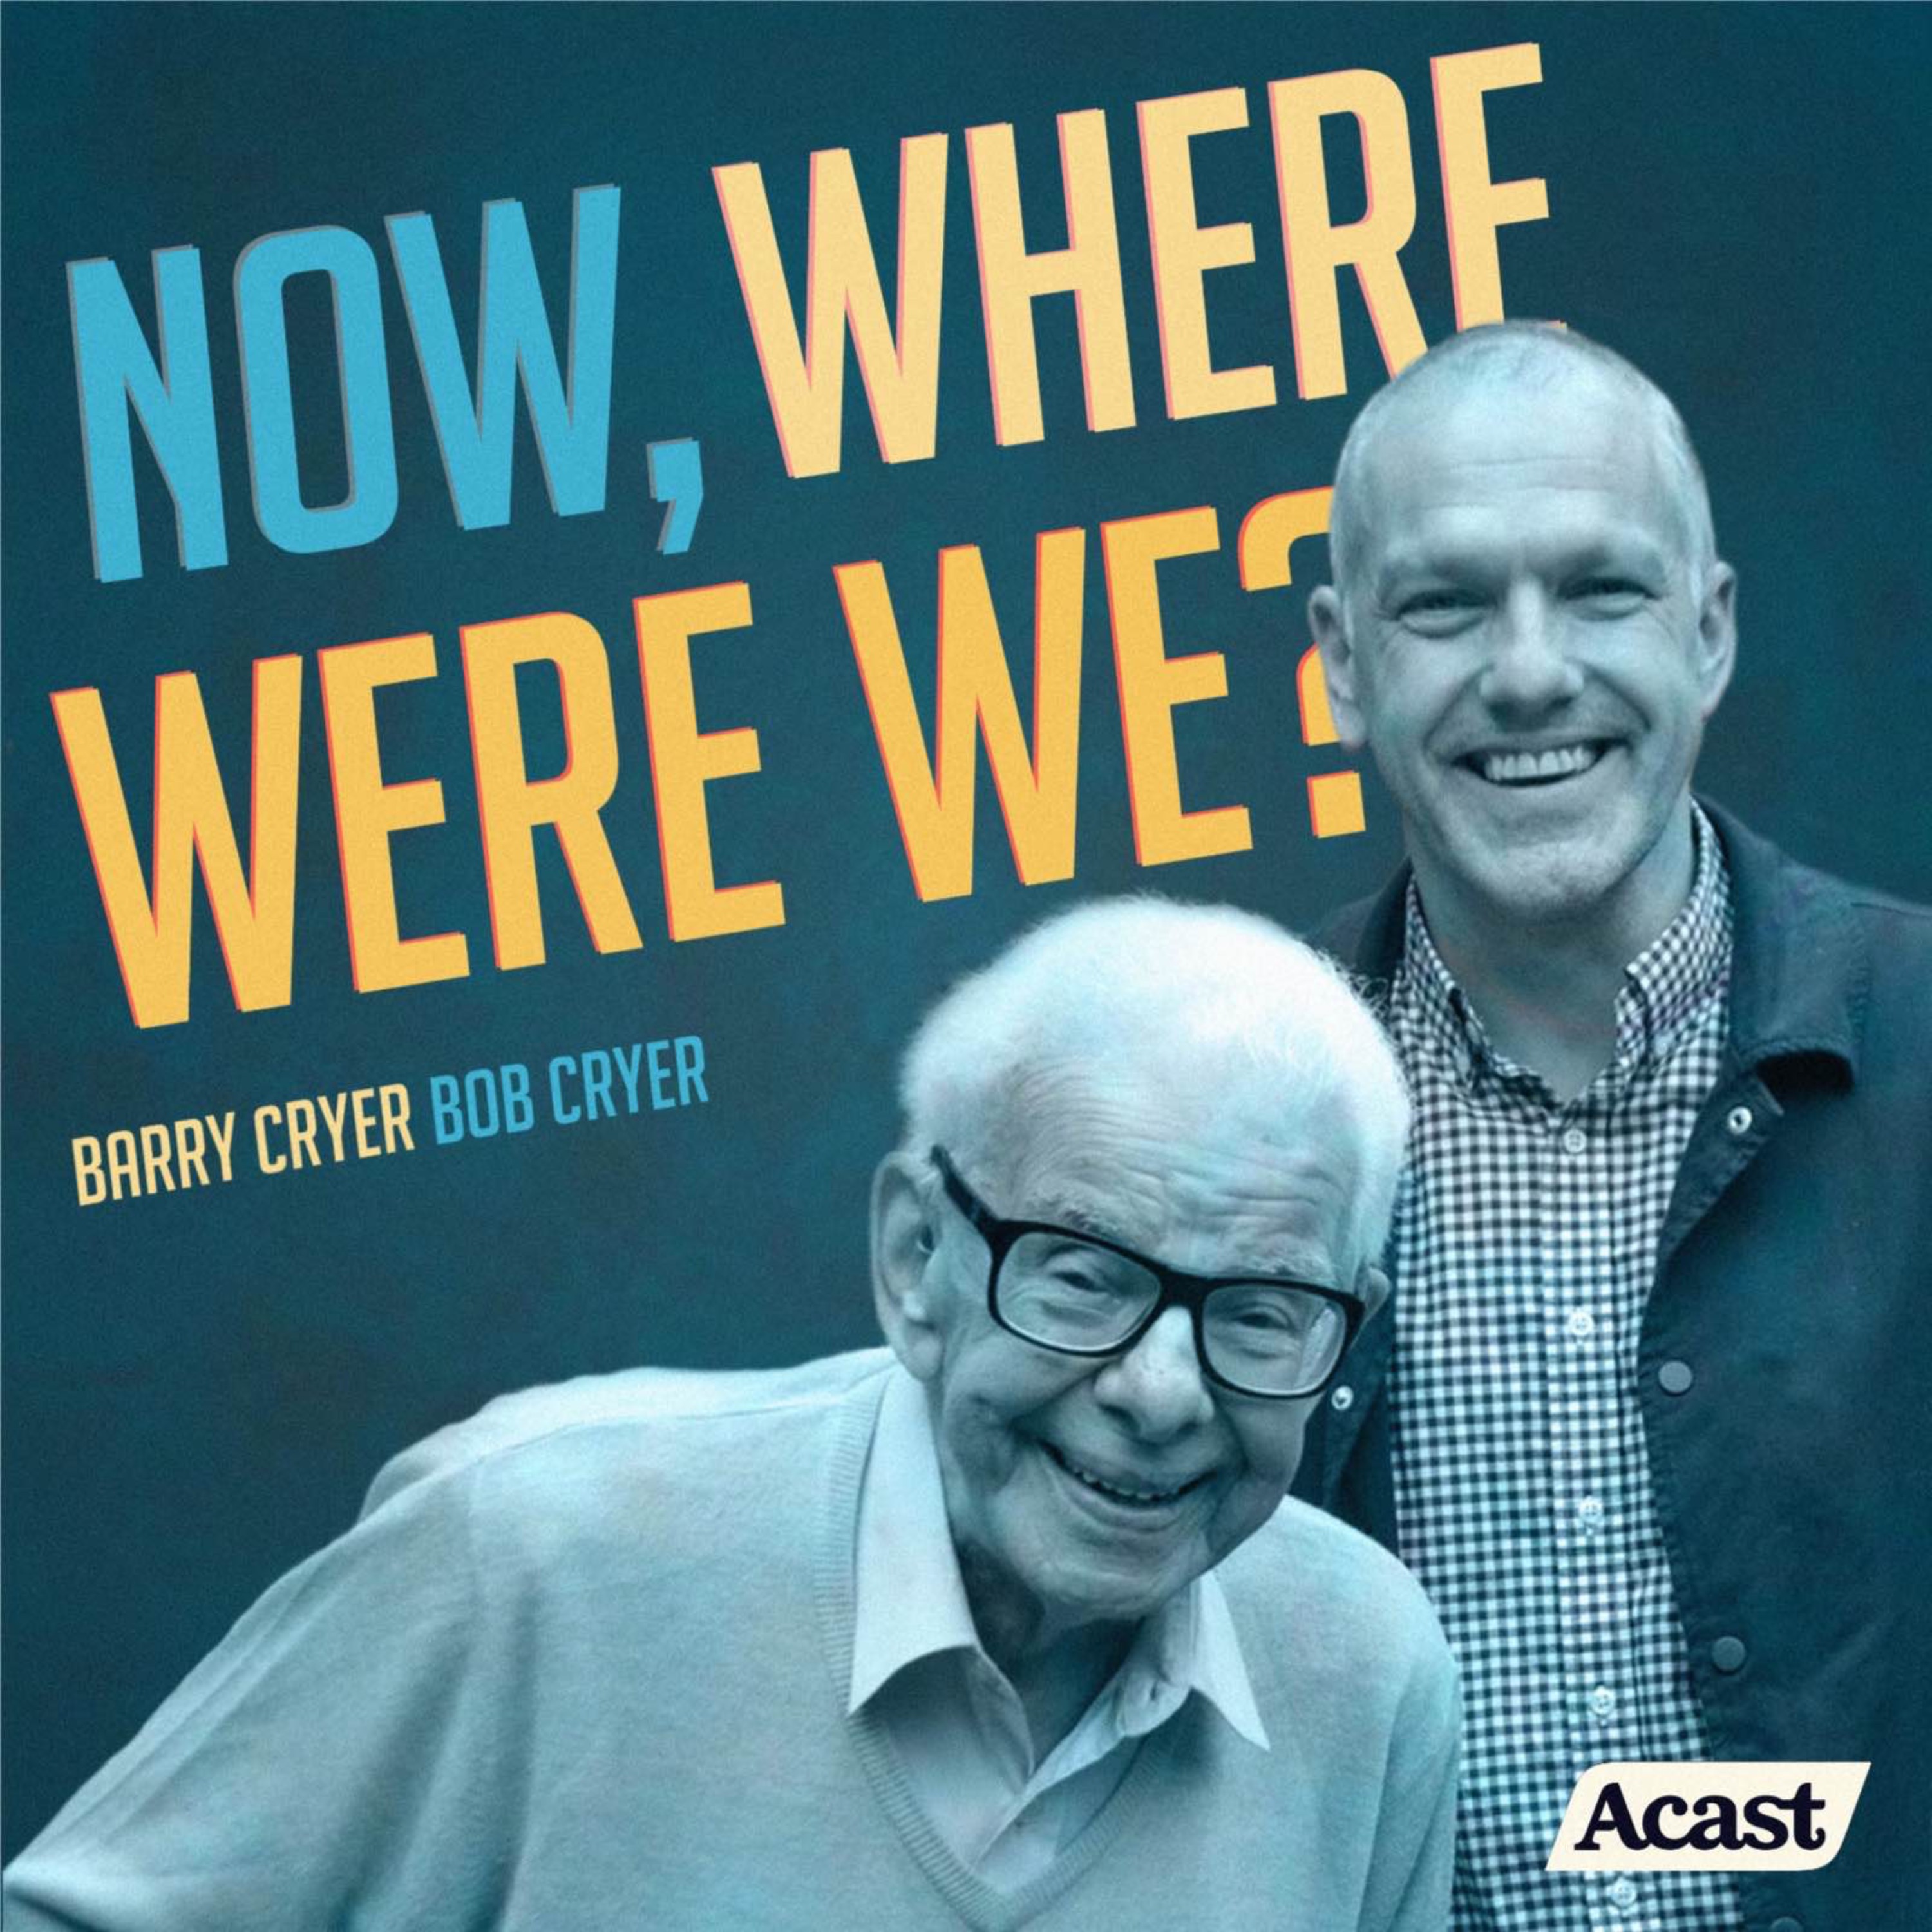 Now, Where Were We? with Barry Cryer and Bob Cryer podcast show image